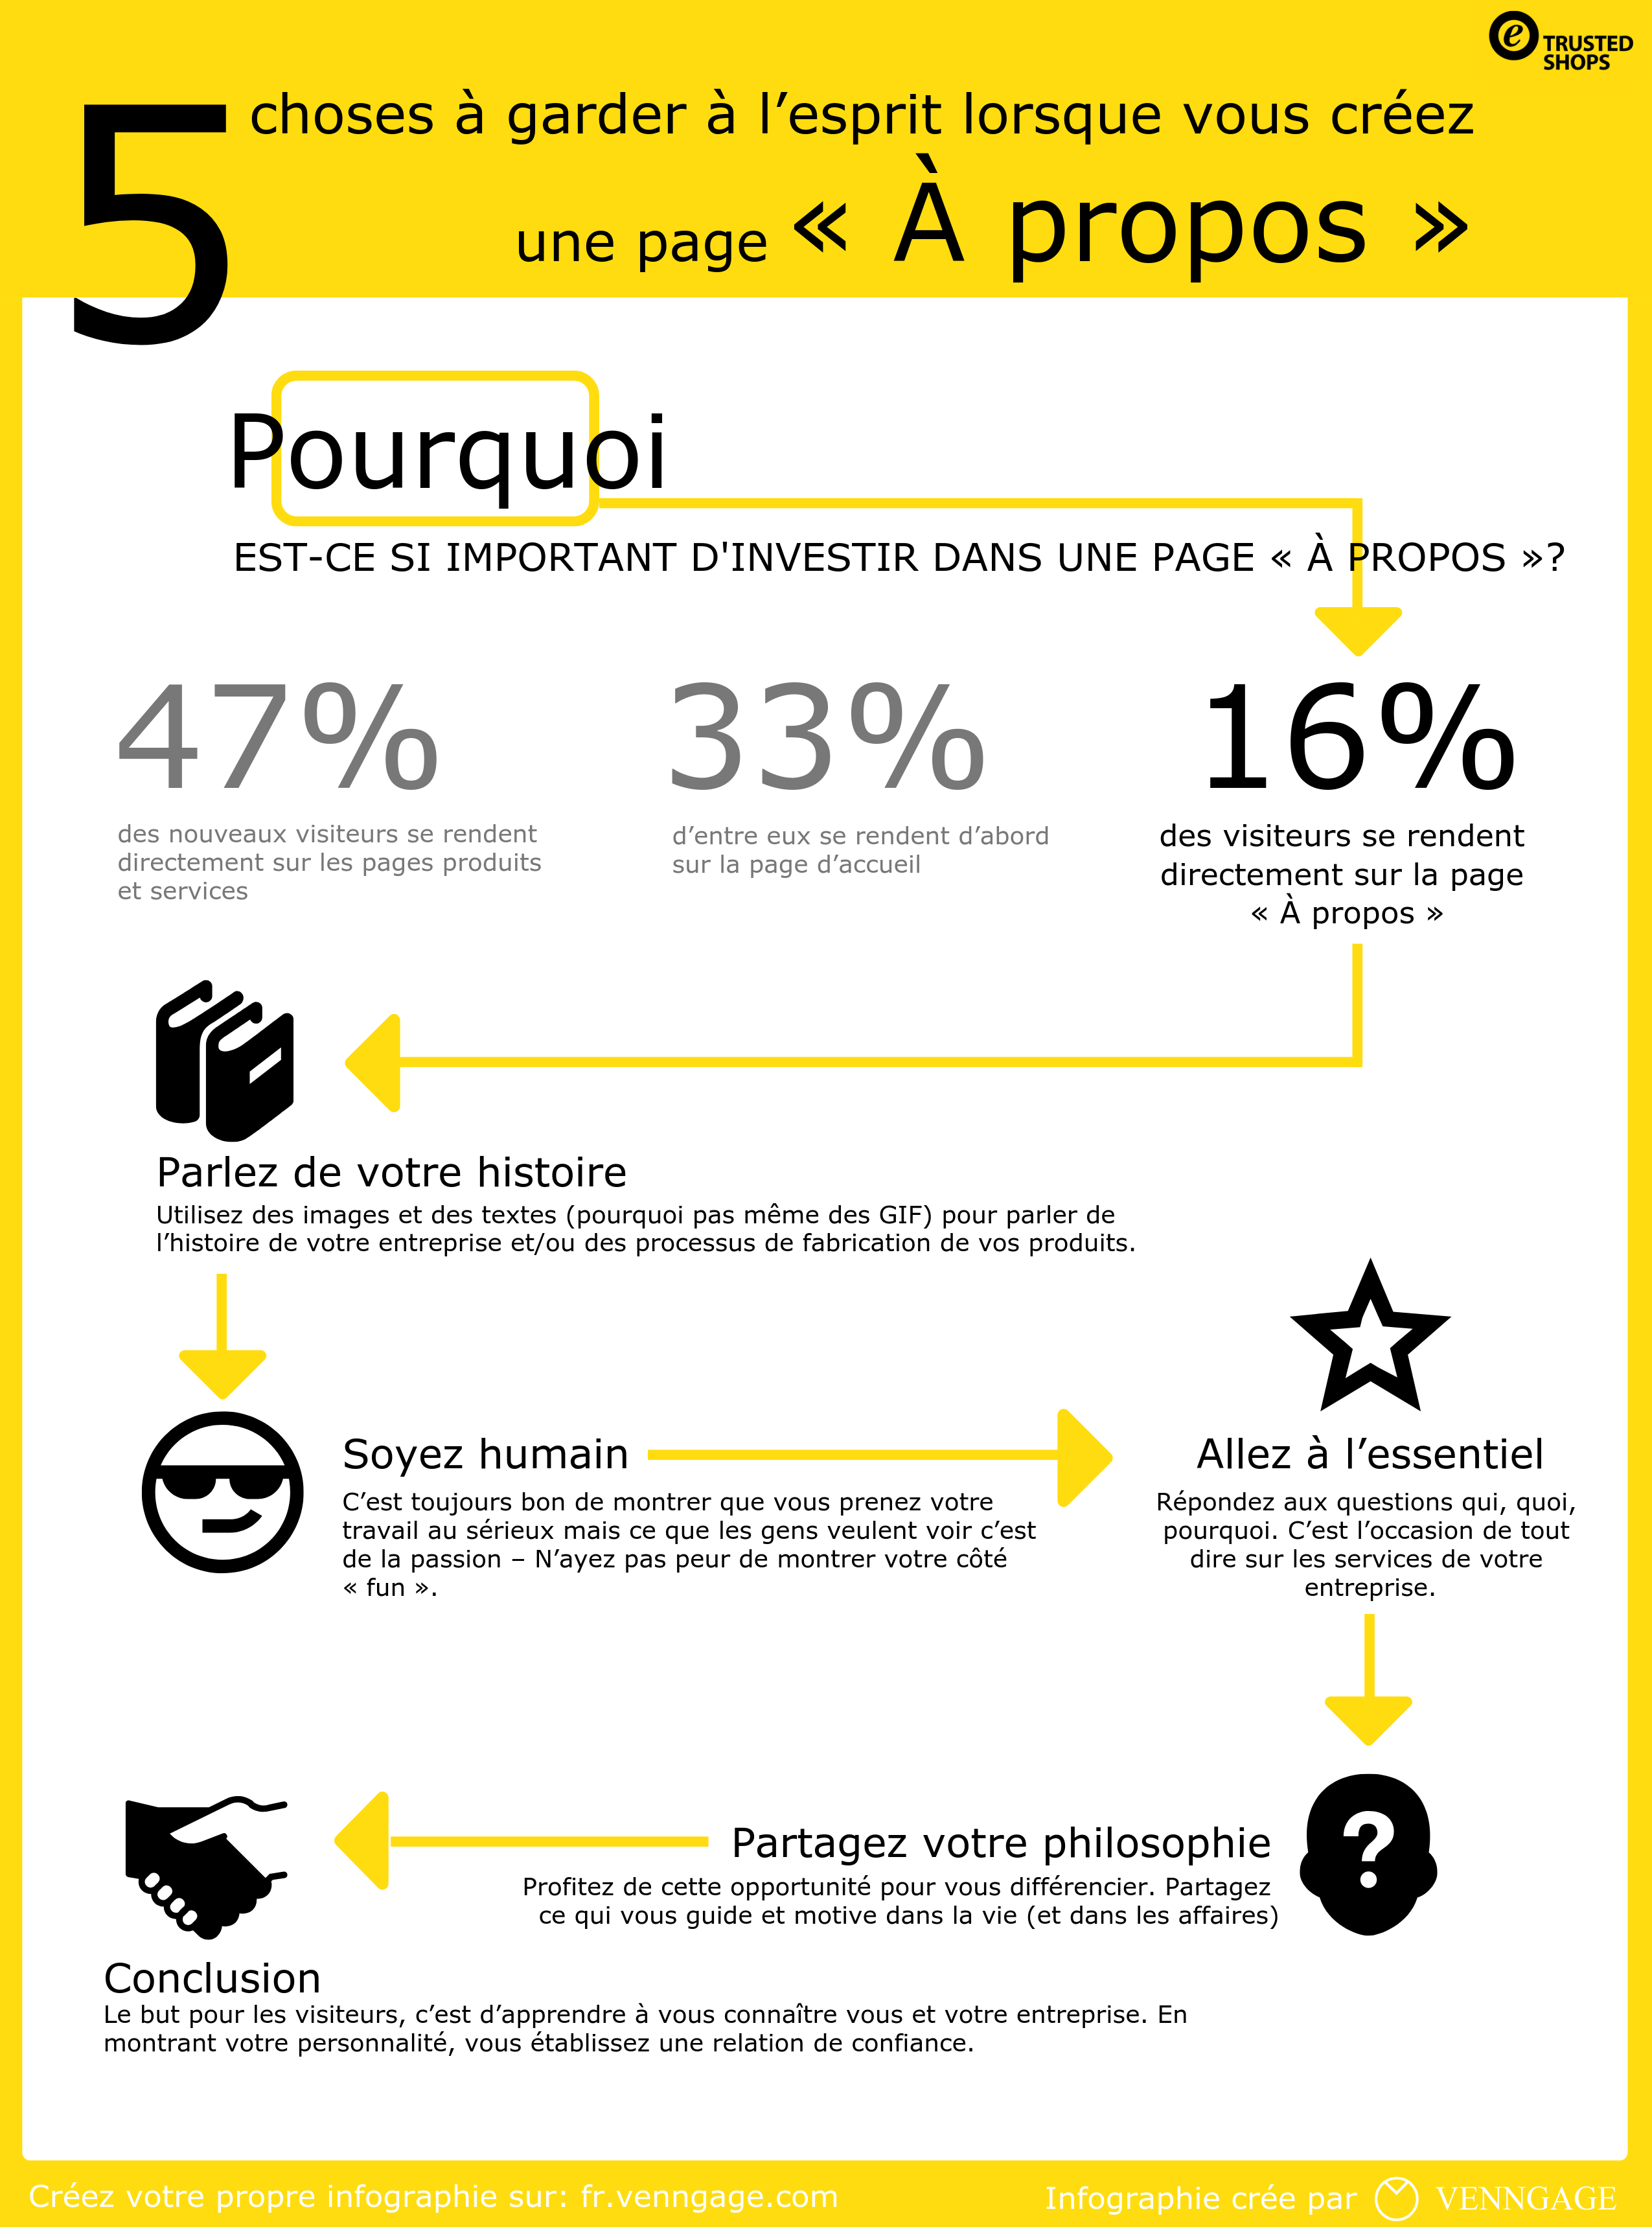 Trusted Shops_5things_infographic_FR